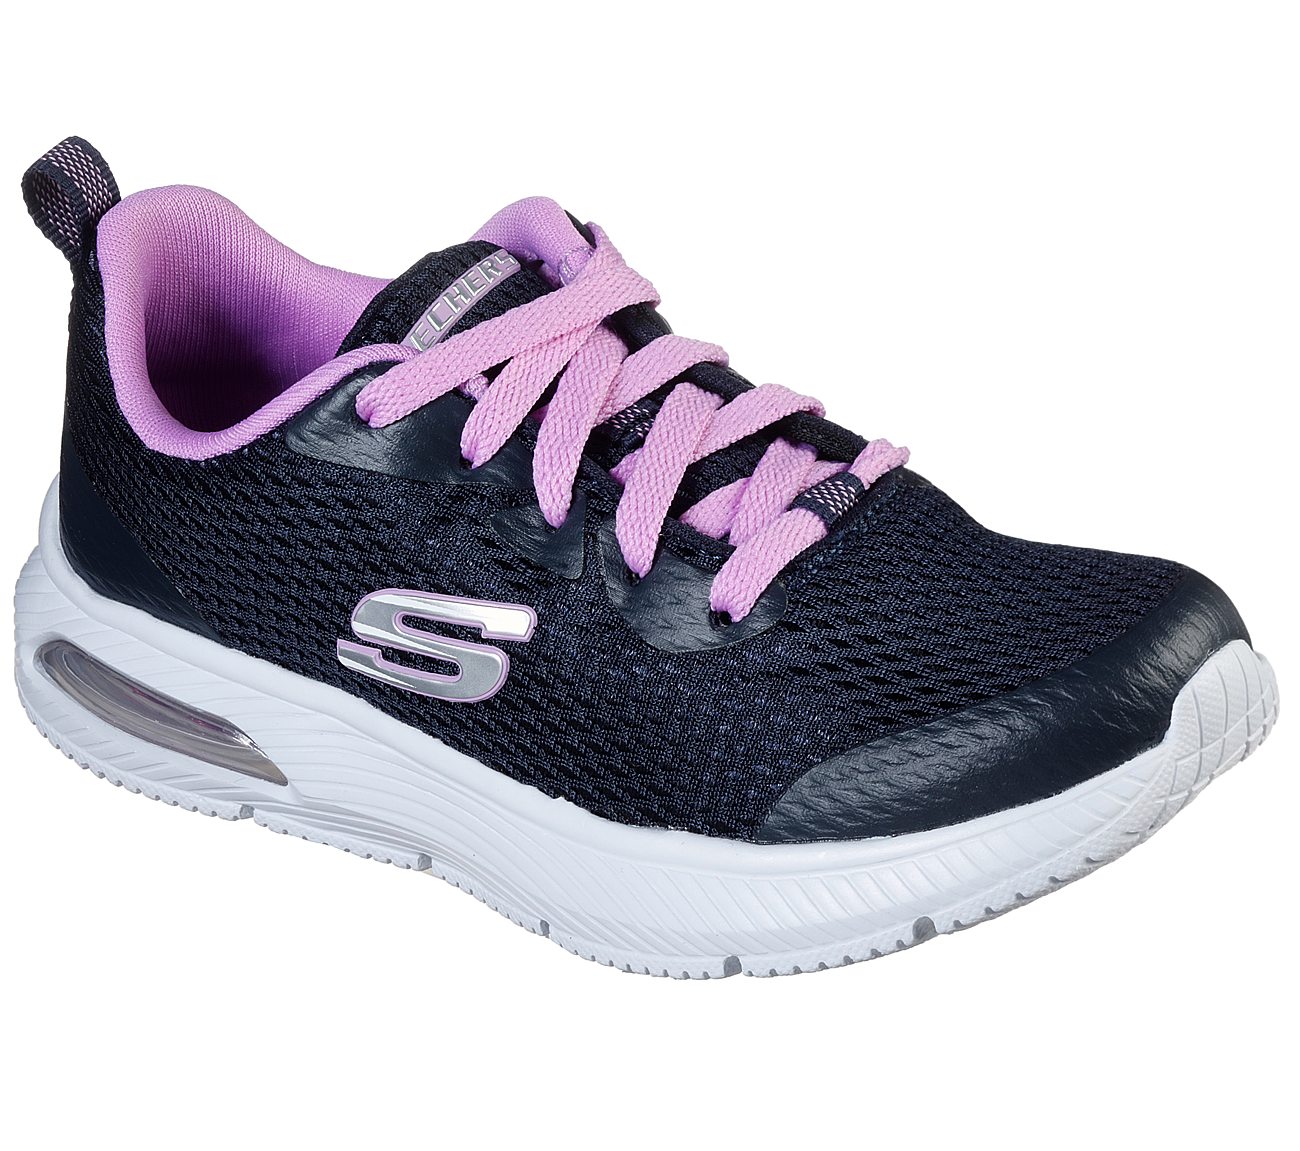 DYNA-AIR-JUMP BRIGHTS, NAVY/LAVENDER Footwear Lateral View